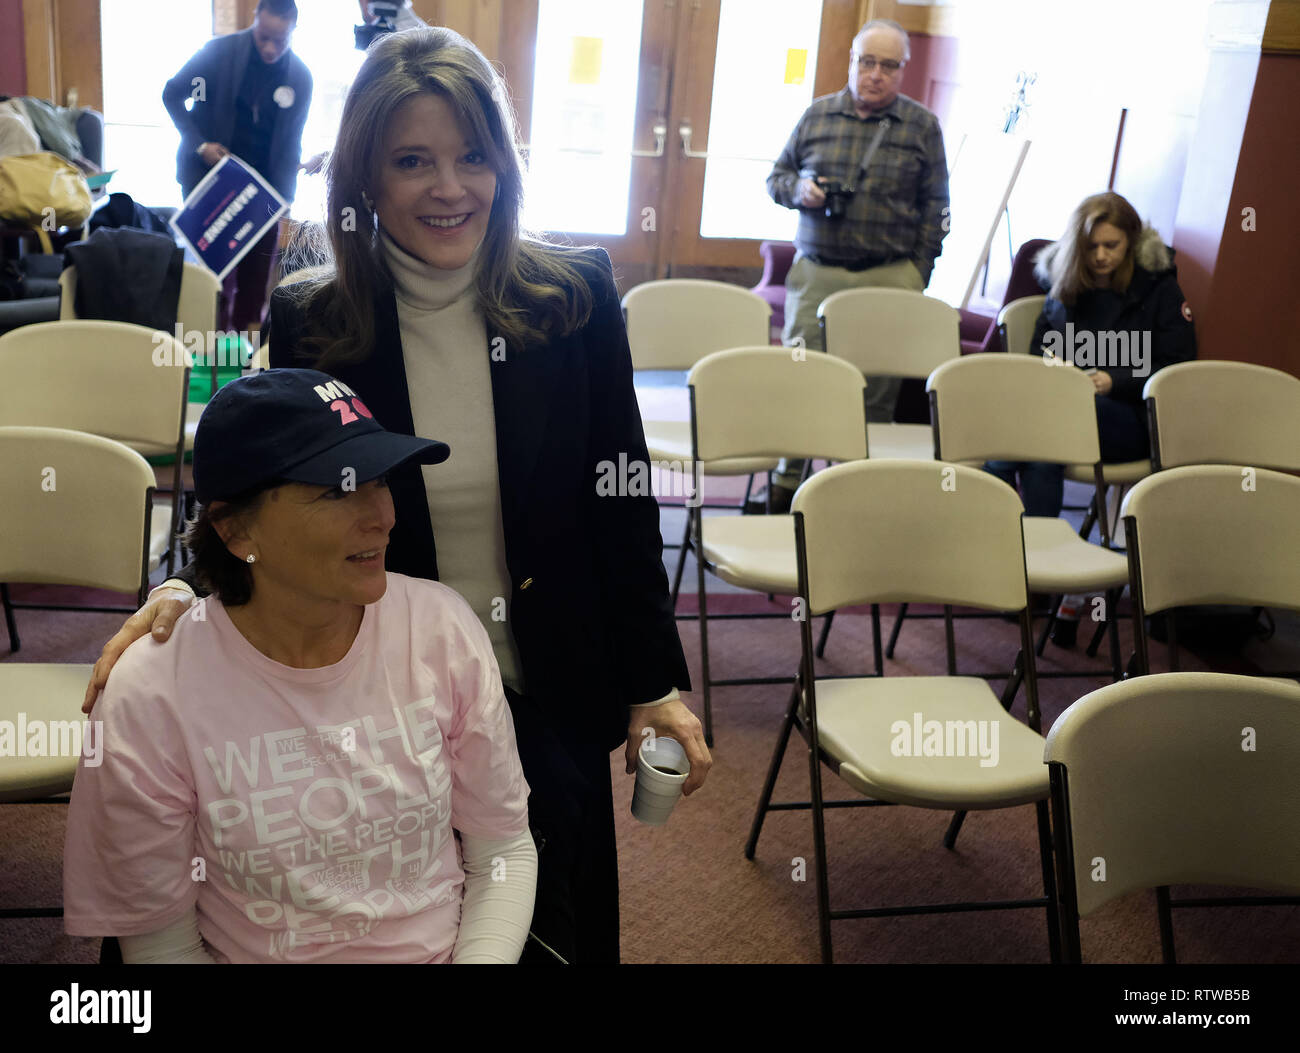 Denison, IOWA, USA. 2nd Mar, 2019. Author and spiritual guru MARIANNE WILLIAMSON, standing, poses with TONYA LAMBERTZ of Yankton, SD who is wearing a Marianne 2020 hat before speaking at the Donna Reed Theatre in Denison, Iowa Saturday, March 2, 2018, and exploring a presidential run for 2020. Credit: Jerry Mennenga/ZUMA Wire/Alamy Live News Stock Photo